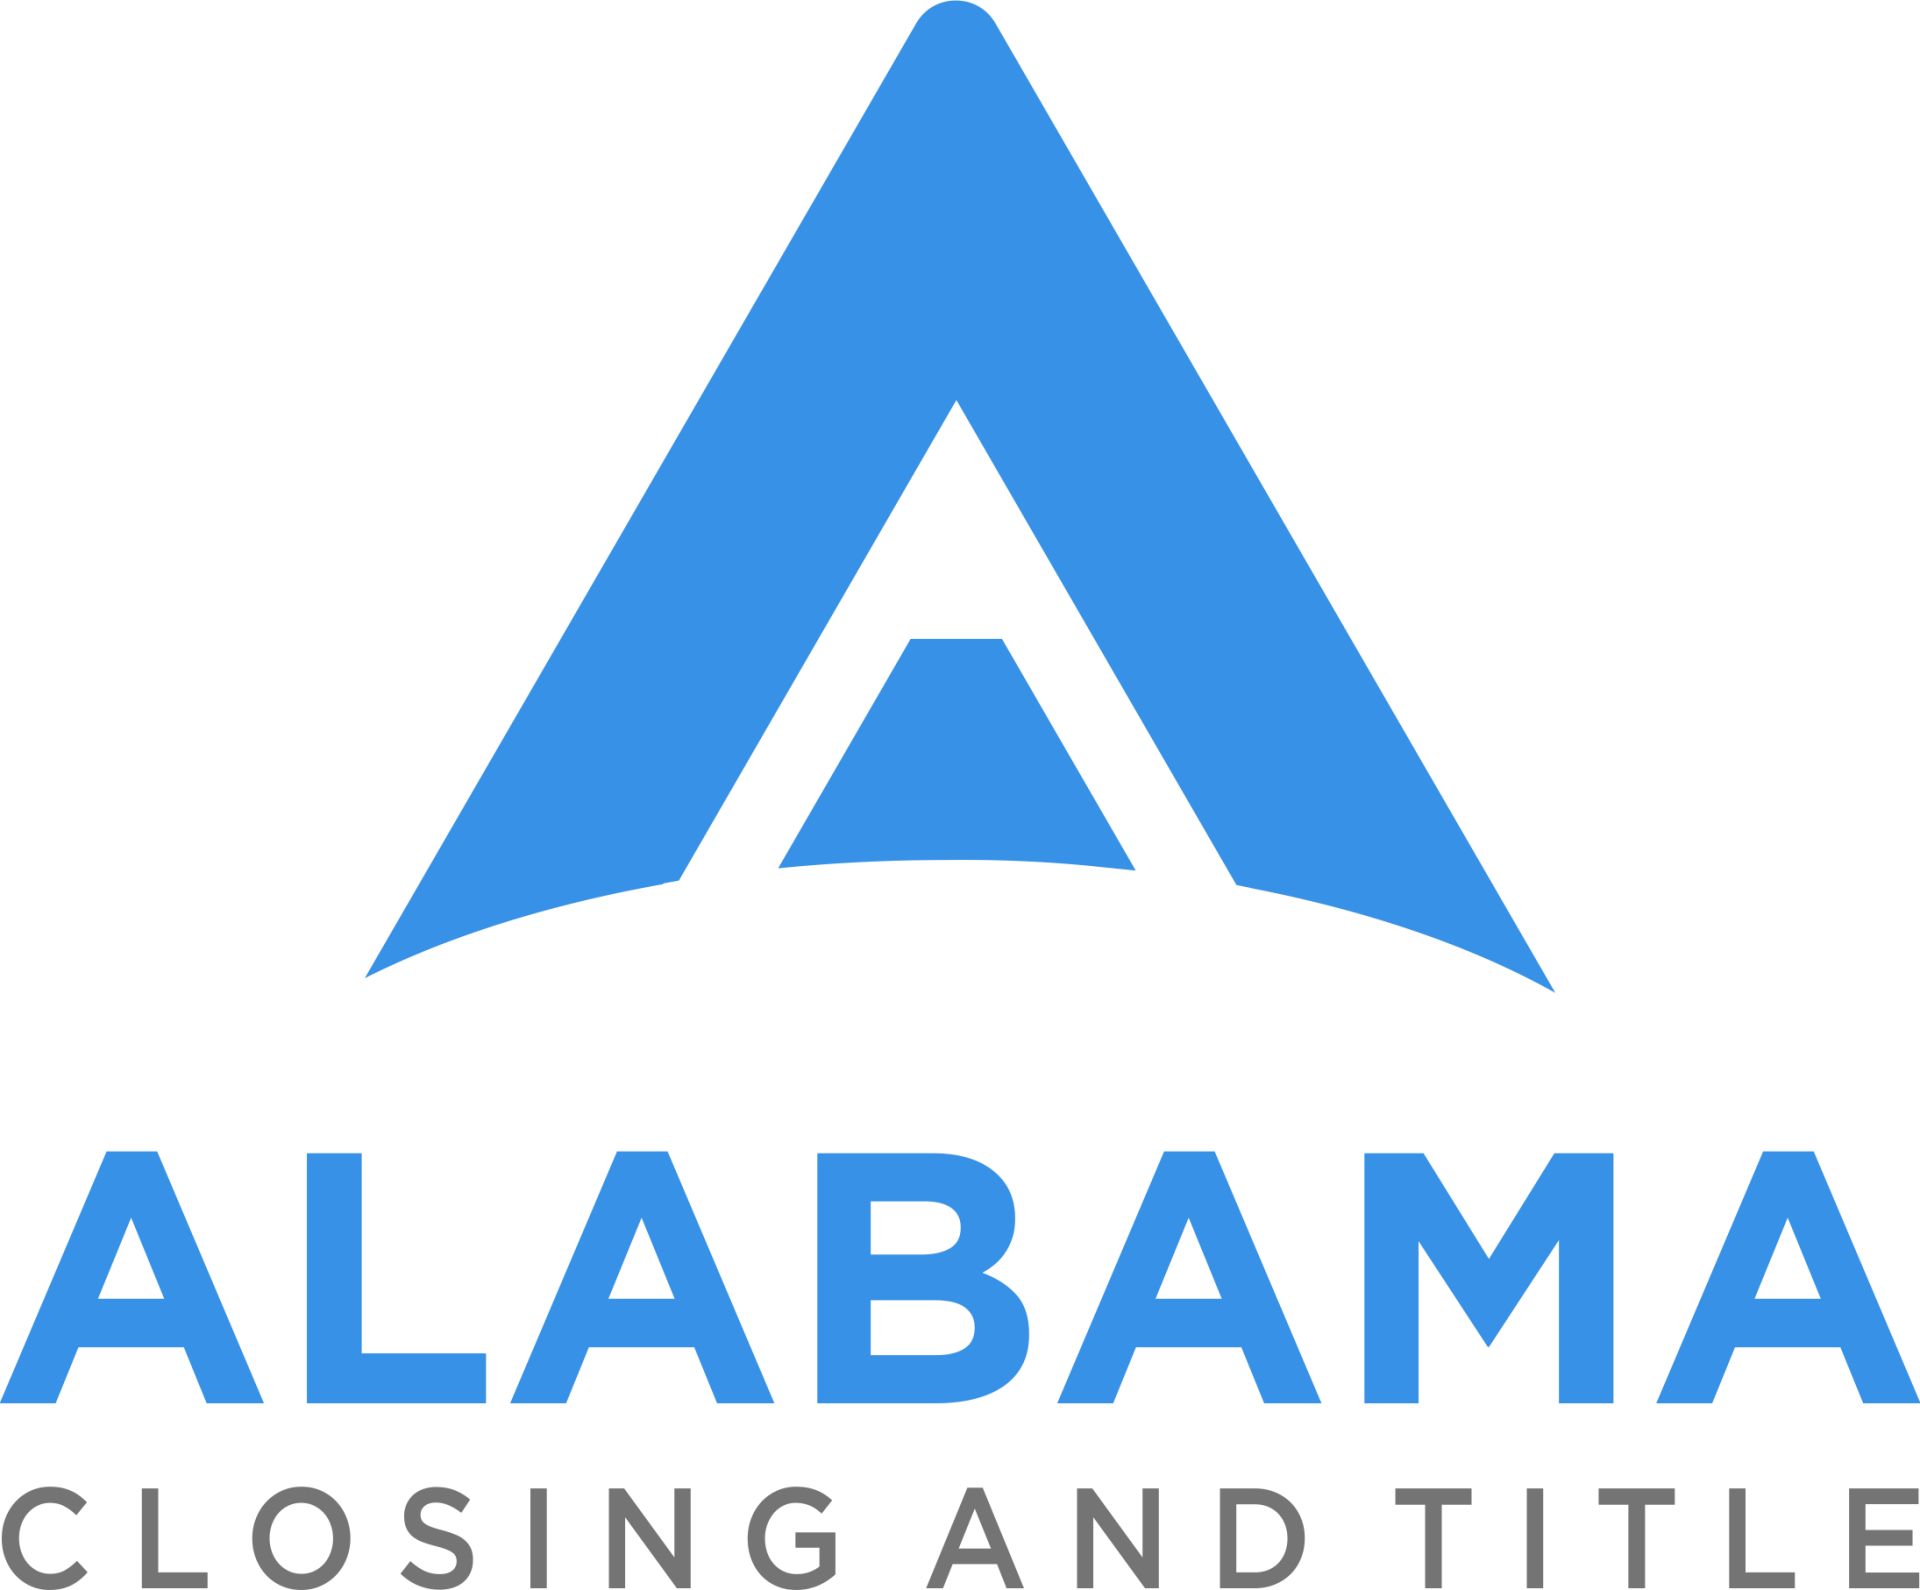 The logo for alabama closing and title is blue and white.